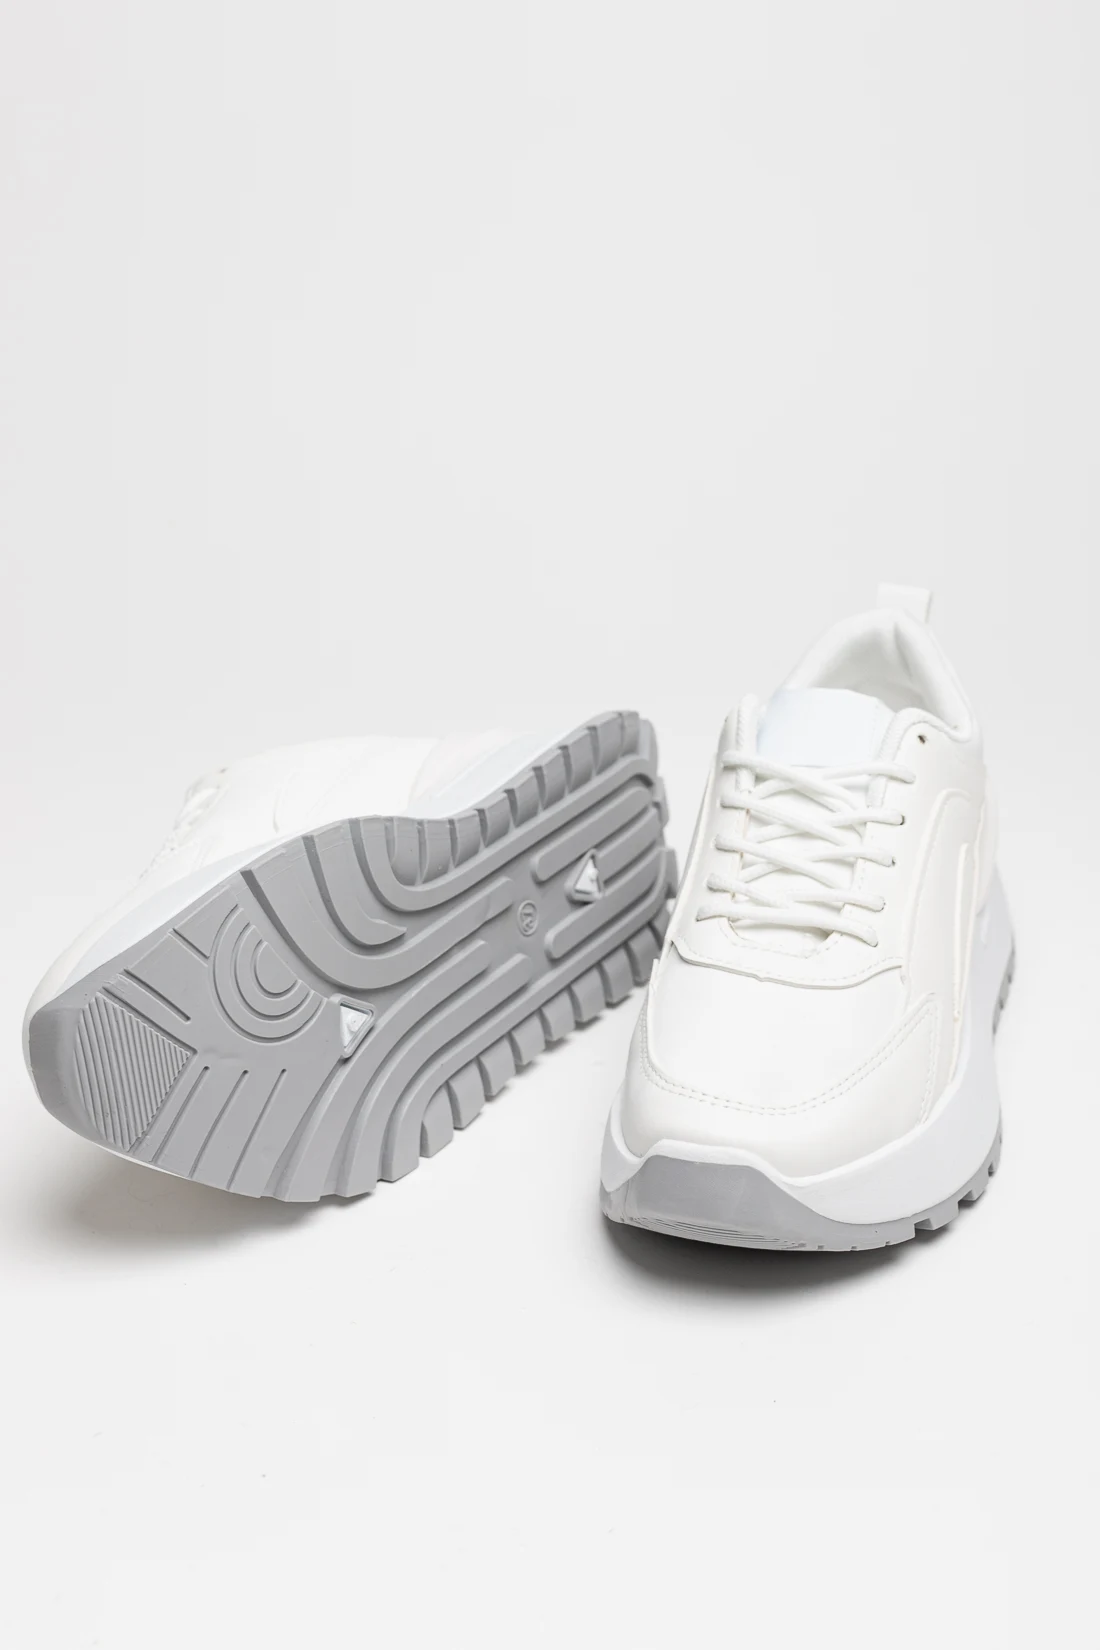 CADRE SNEAKERS - WHITE